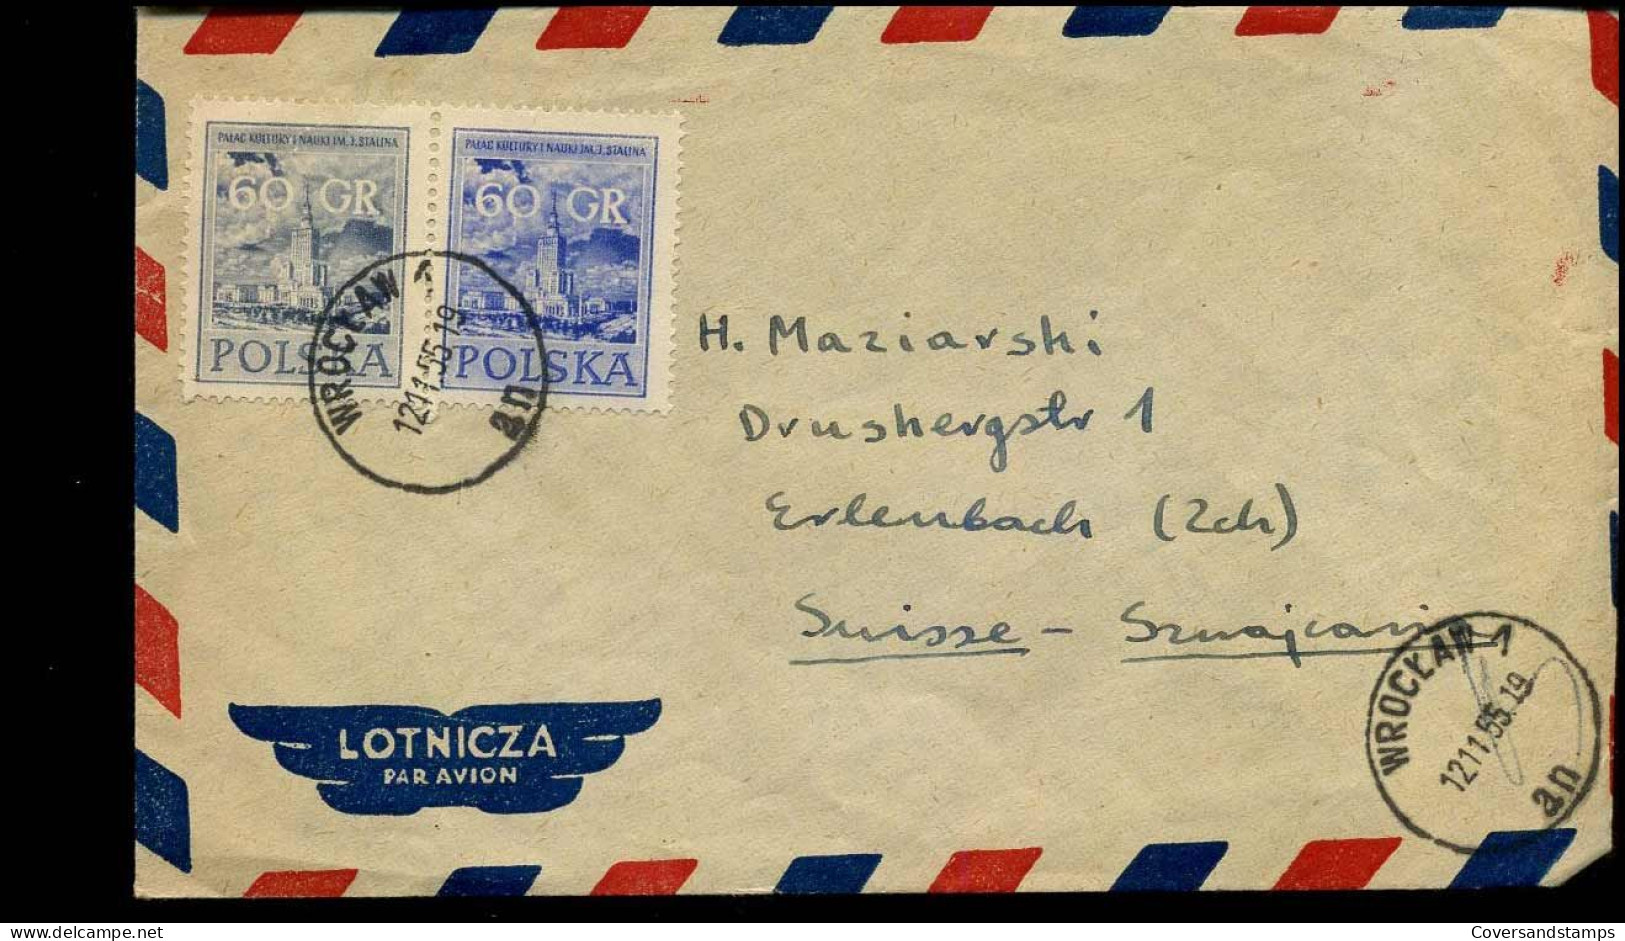 Airmail Cover To Erlenbach, Switzerland - Lettres & Documents